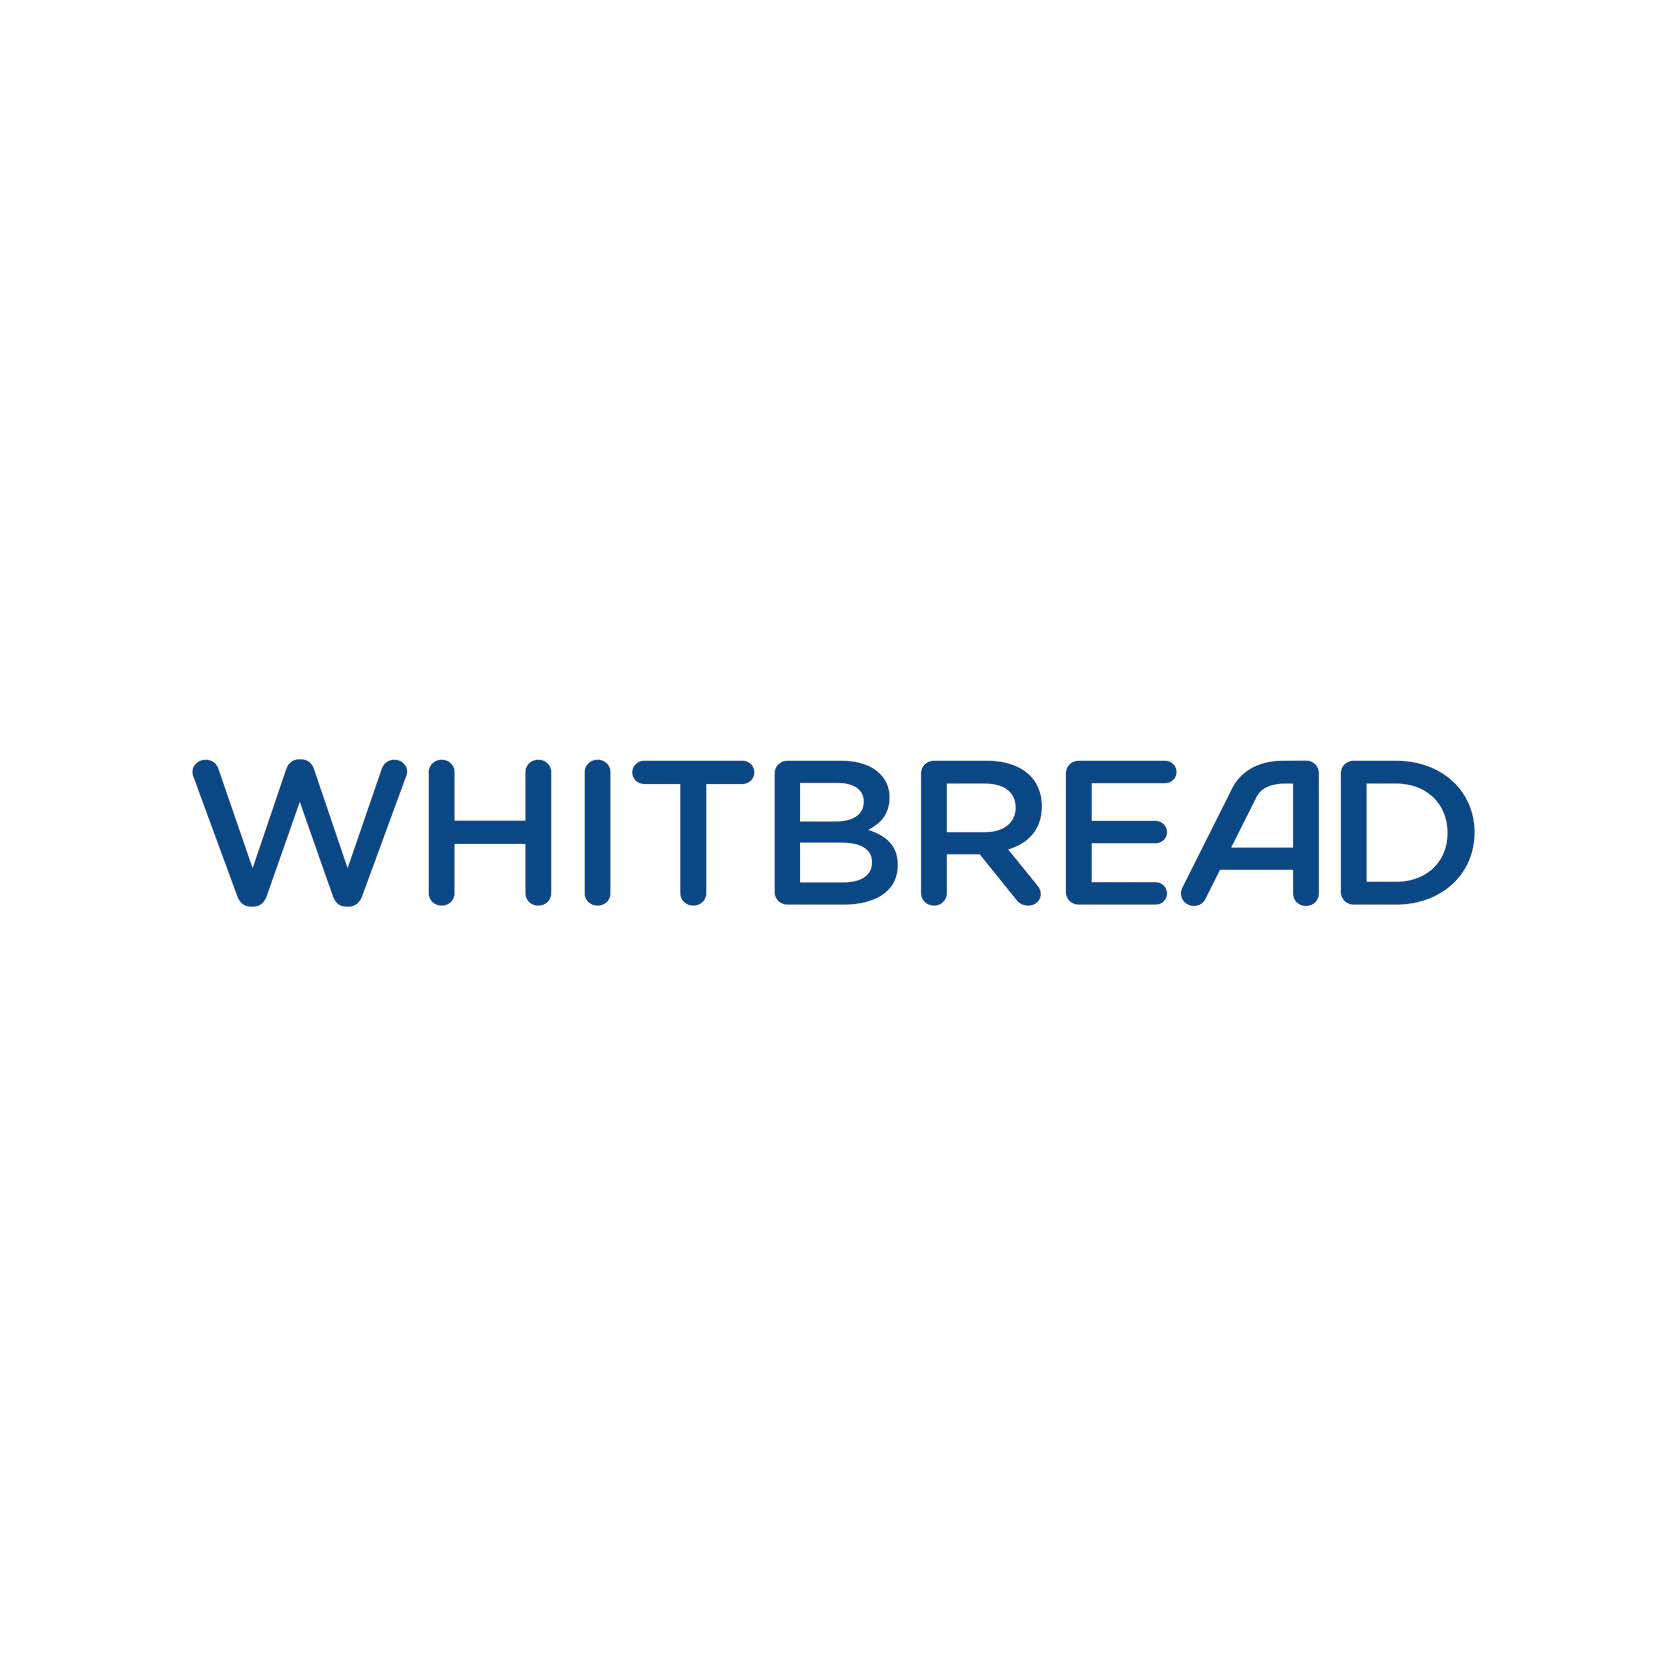 Whitbread shares